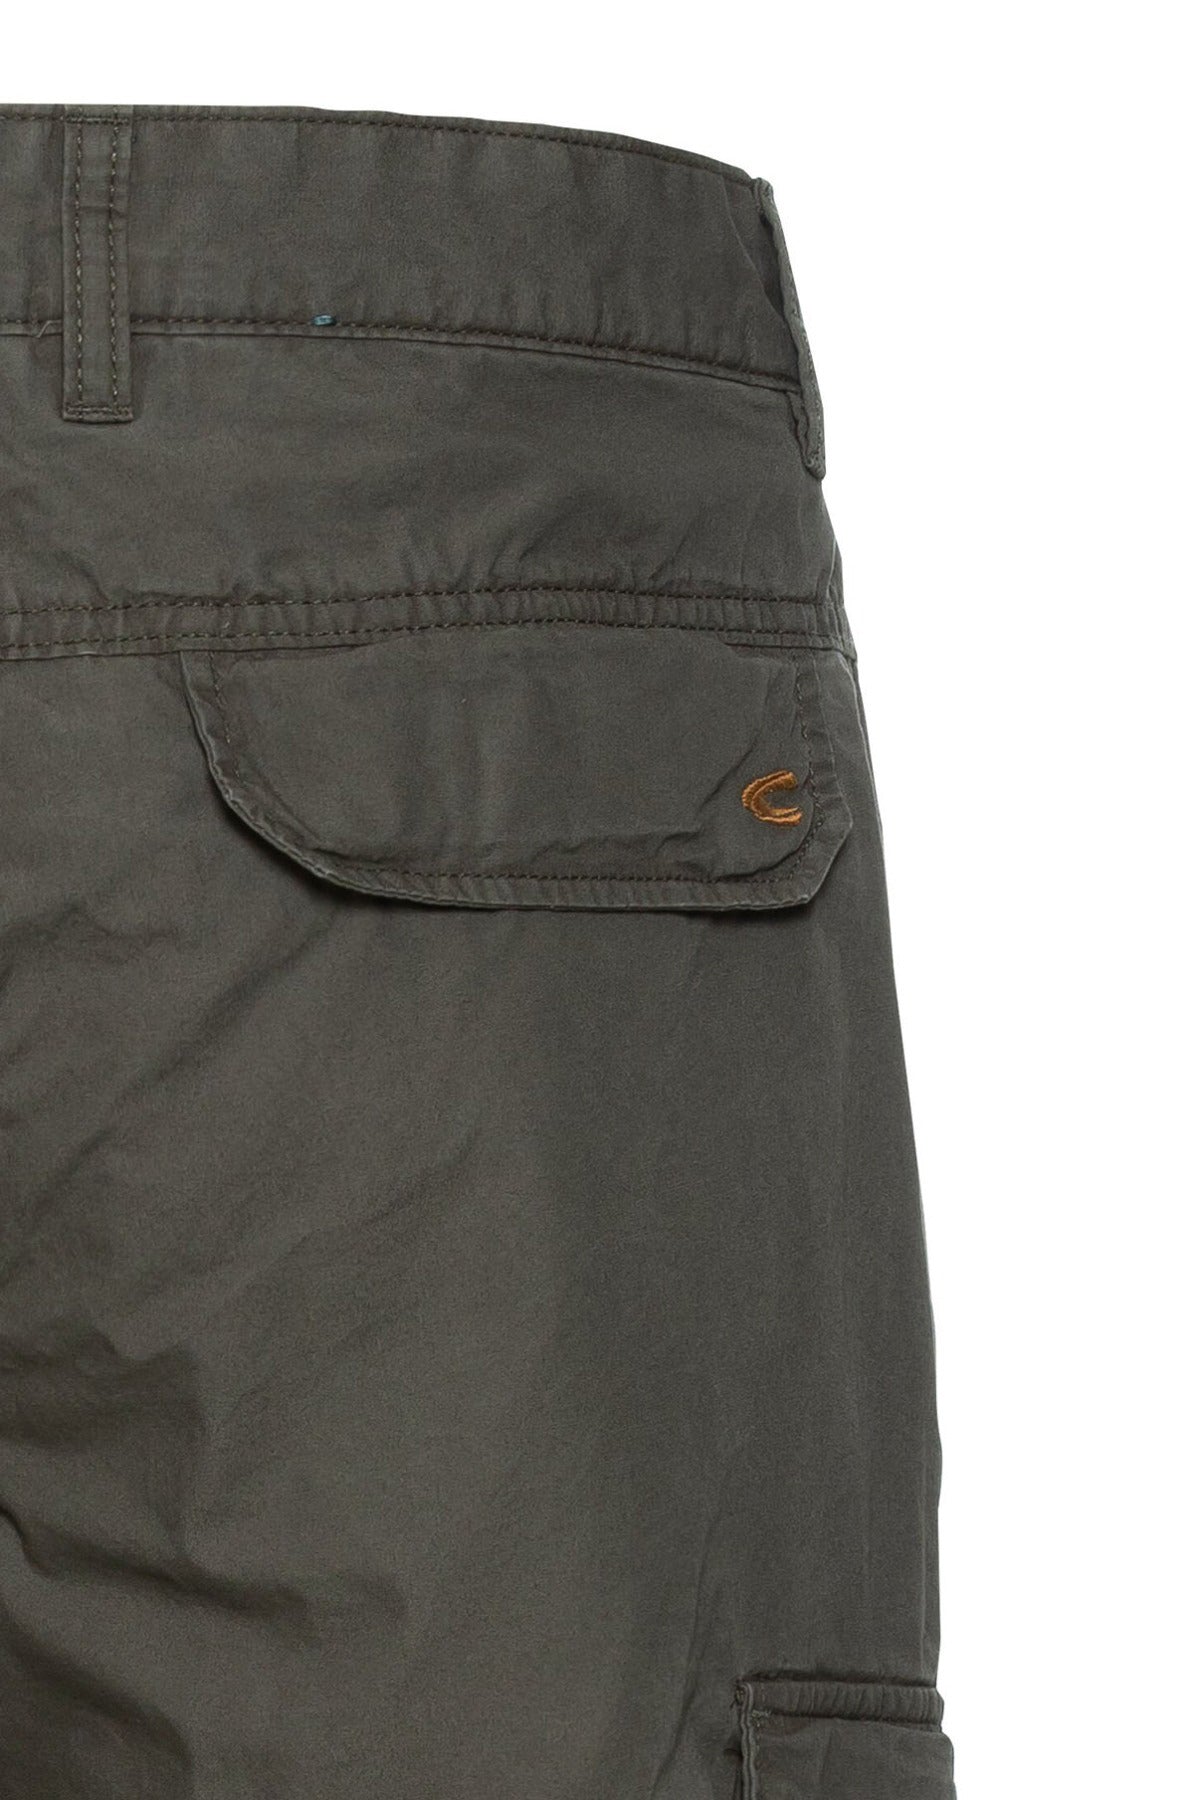 Camel Active Knickers Shorts